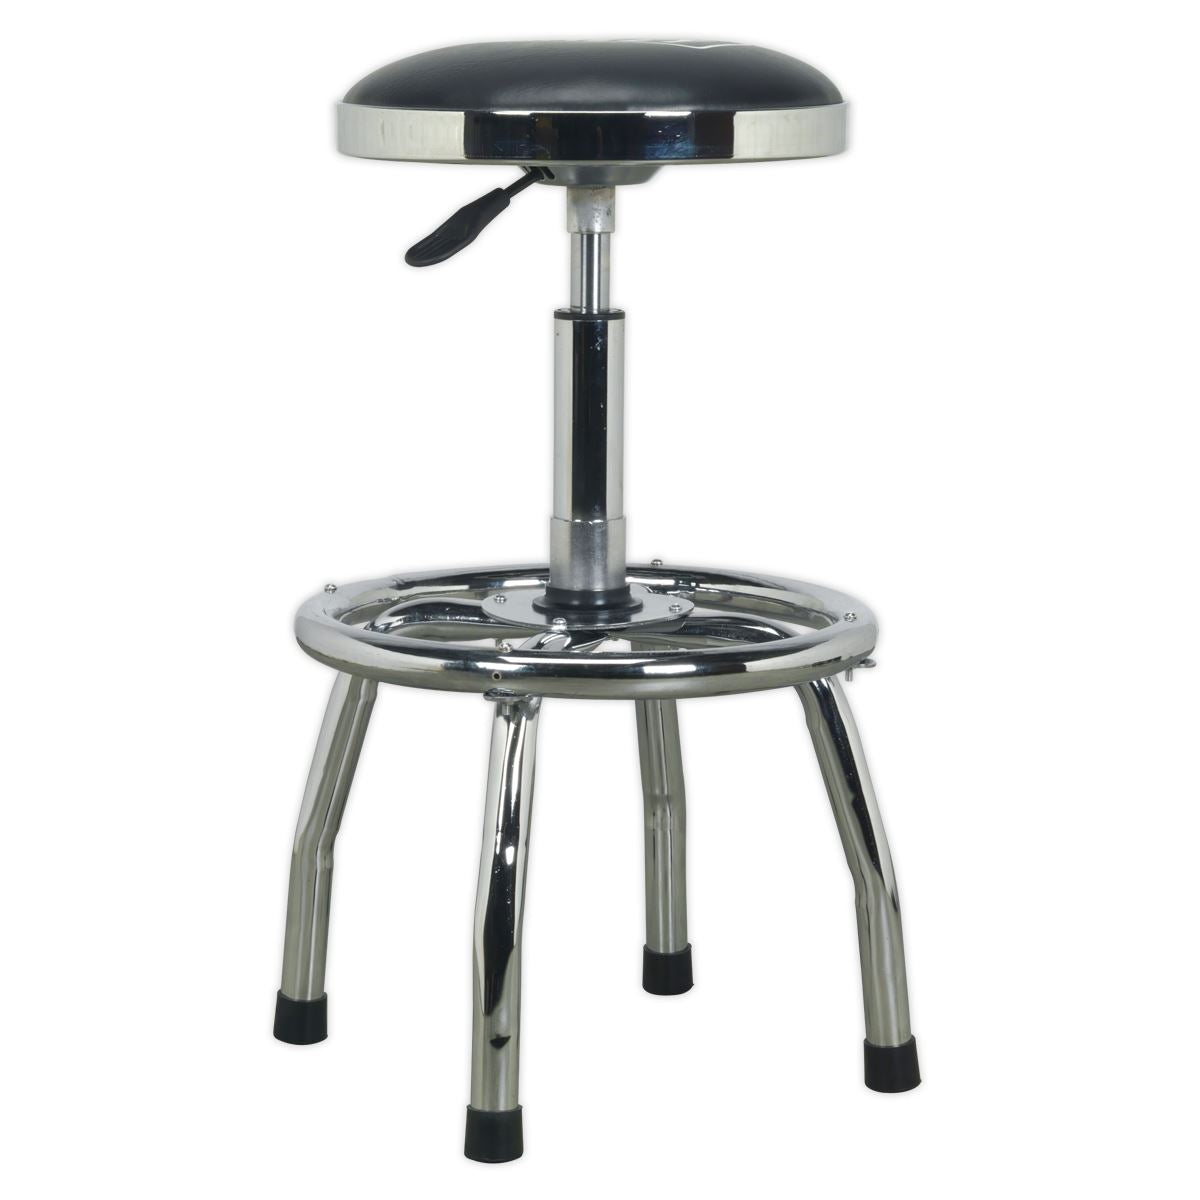 Sealey Pneumatic Stool Heavy-Duty Workshop with Adjustable Height Swivel Seat